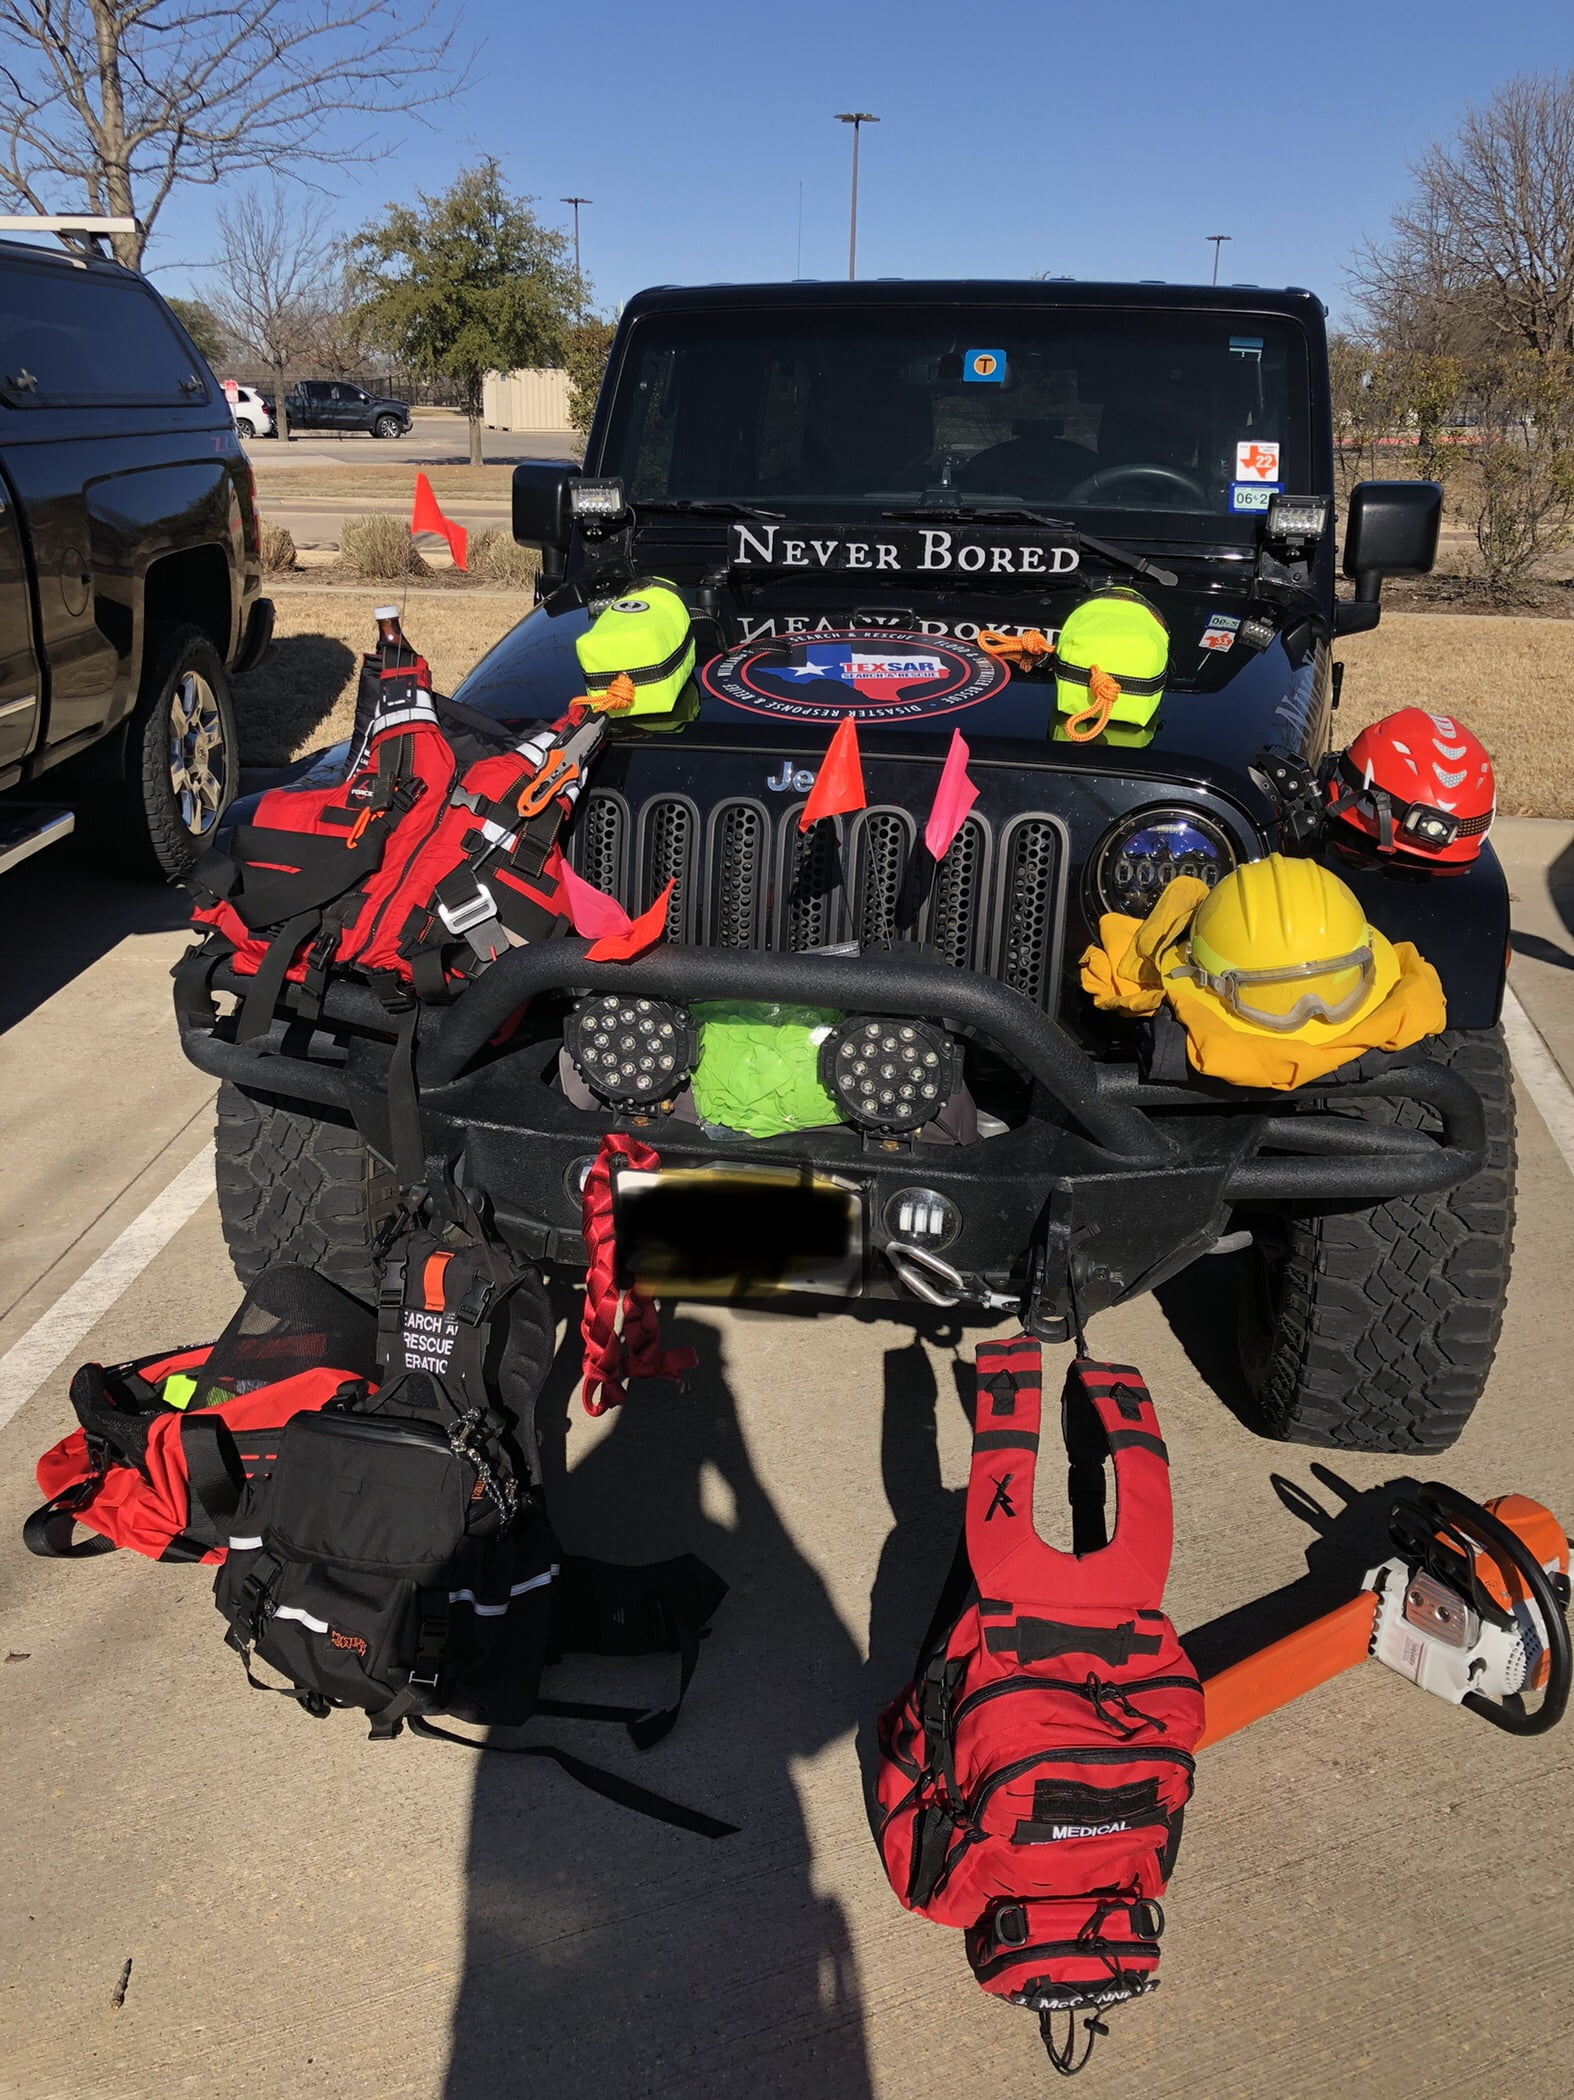 Jeep with first responder gear containing gear for security, safety, and medical response